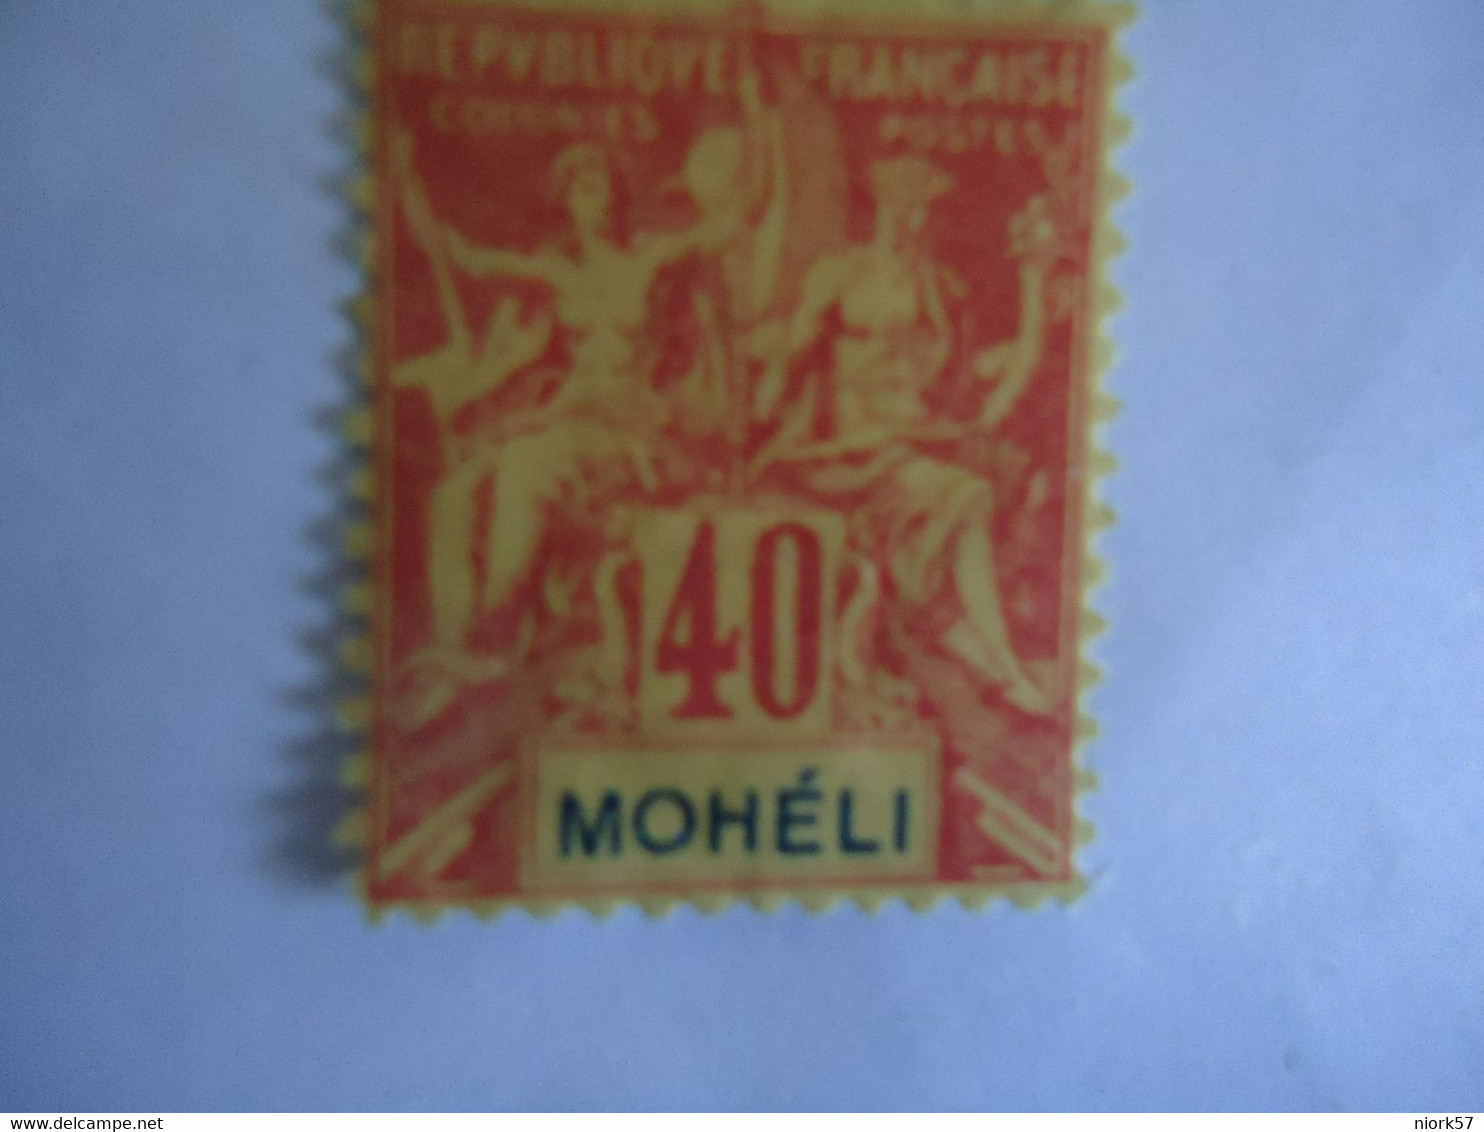 MOHELI FRANCE  COLONIES MLN  STAMPS   40C - Gebraucht